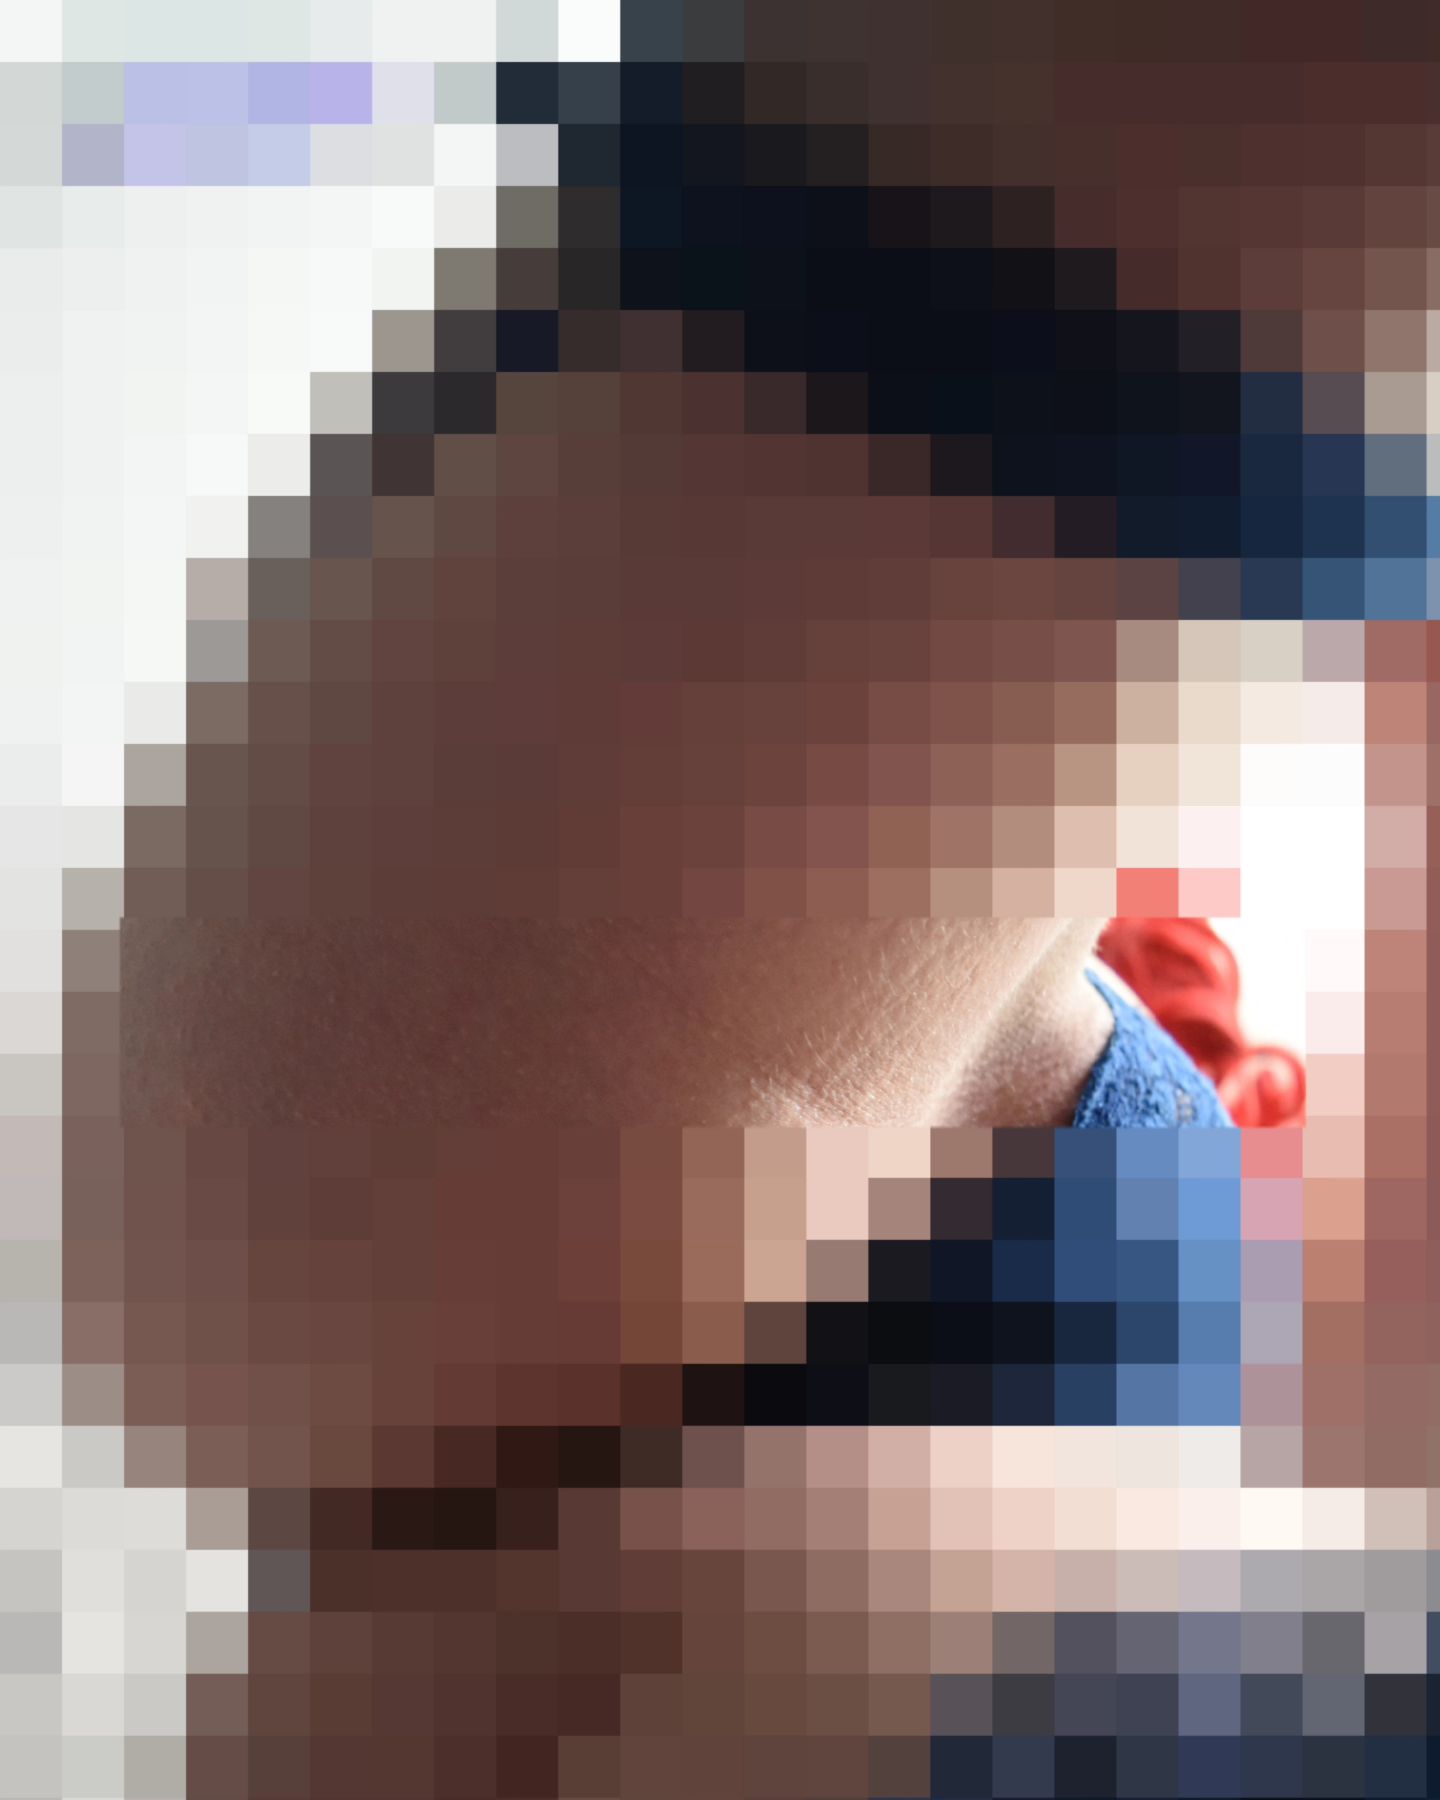 Admit that you stared at my censor for 30 seconds

#fogging #pixels #censored #naked #NSFW #smalltits #egirl #beautiful #goddess #findom #fyp #blue #lingerie #booty #butt #bigbooty #paleskin #redhead